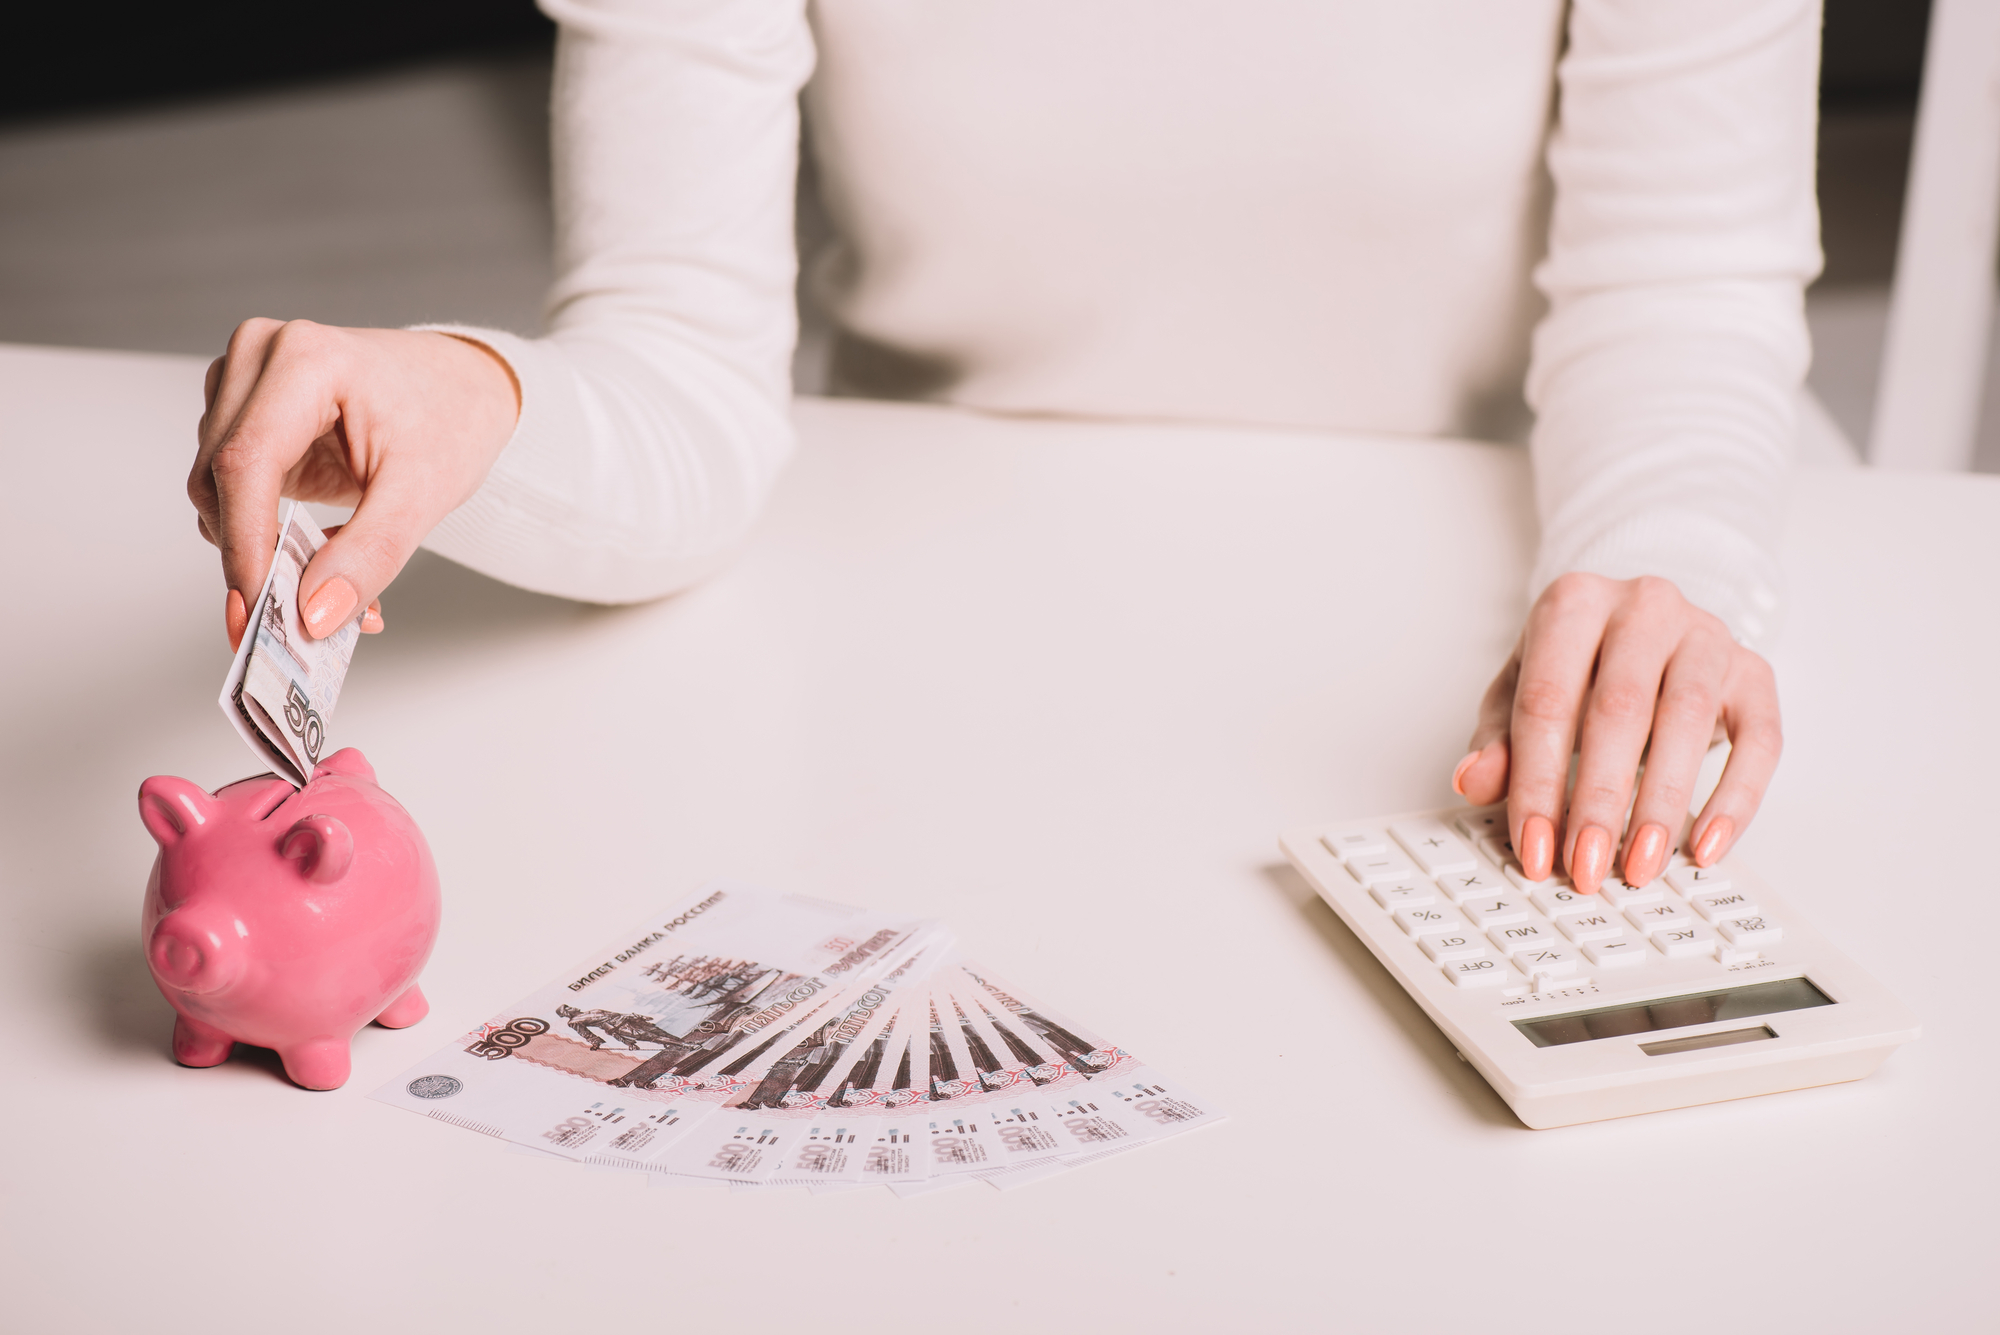 woman at white desk putting money notes into a pink piggy bank with one hand and using calculator with the other with a fan of money notes in front of her.